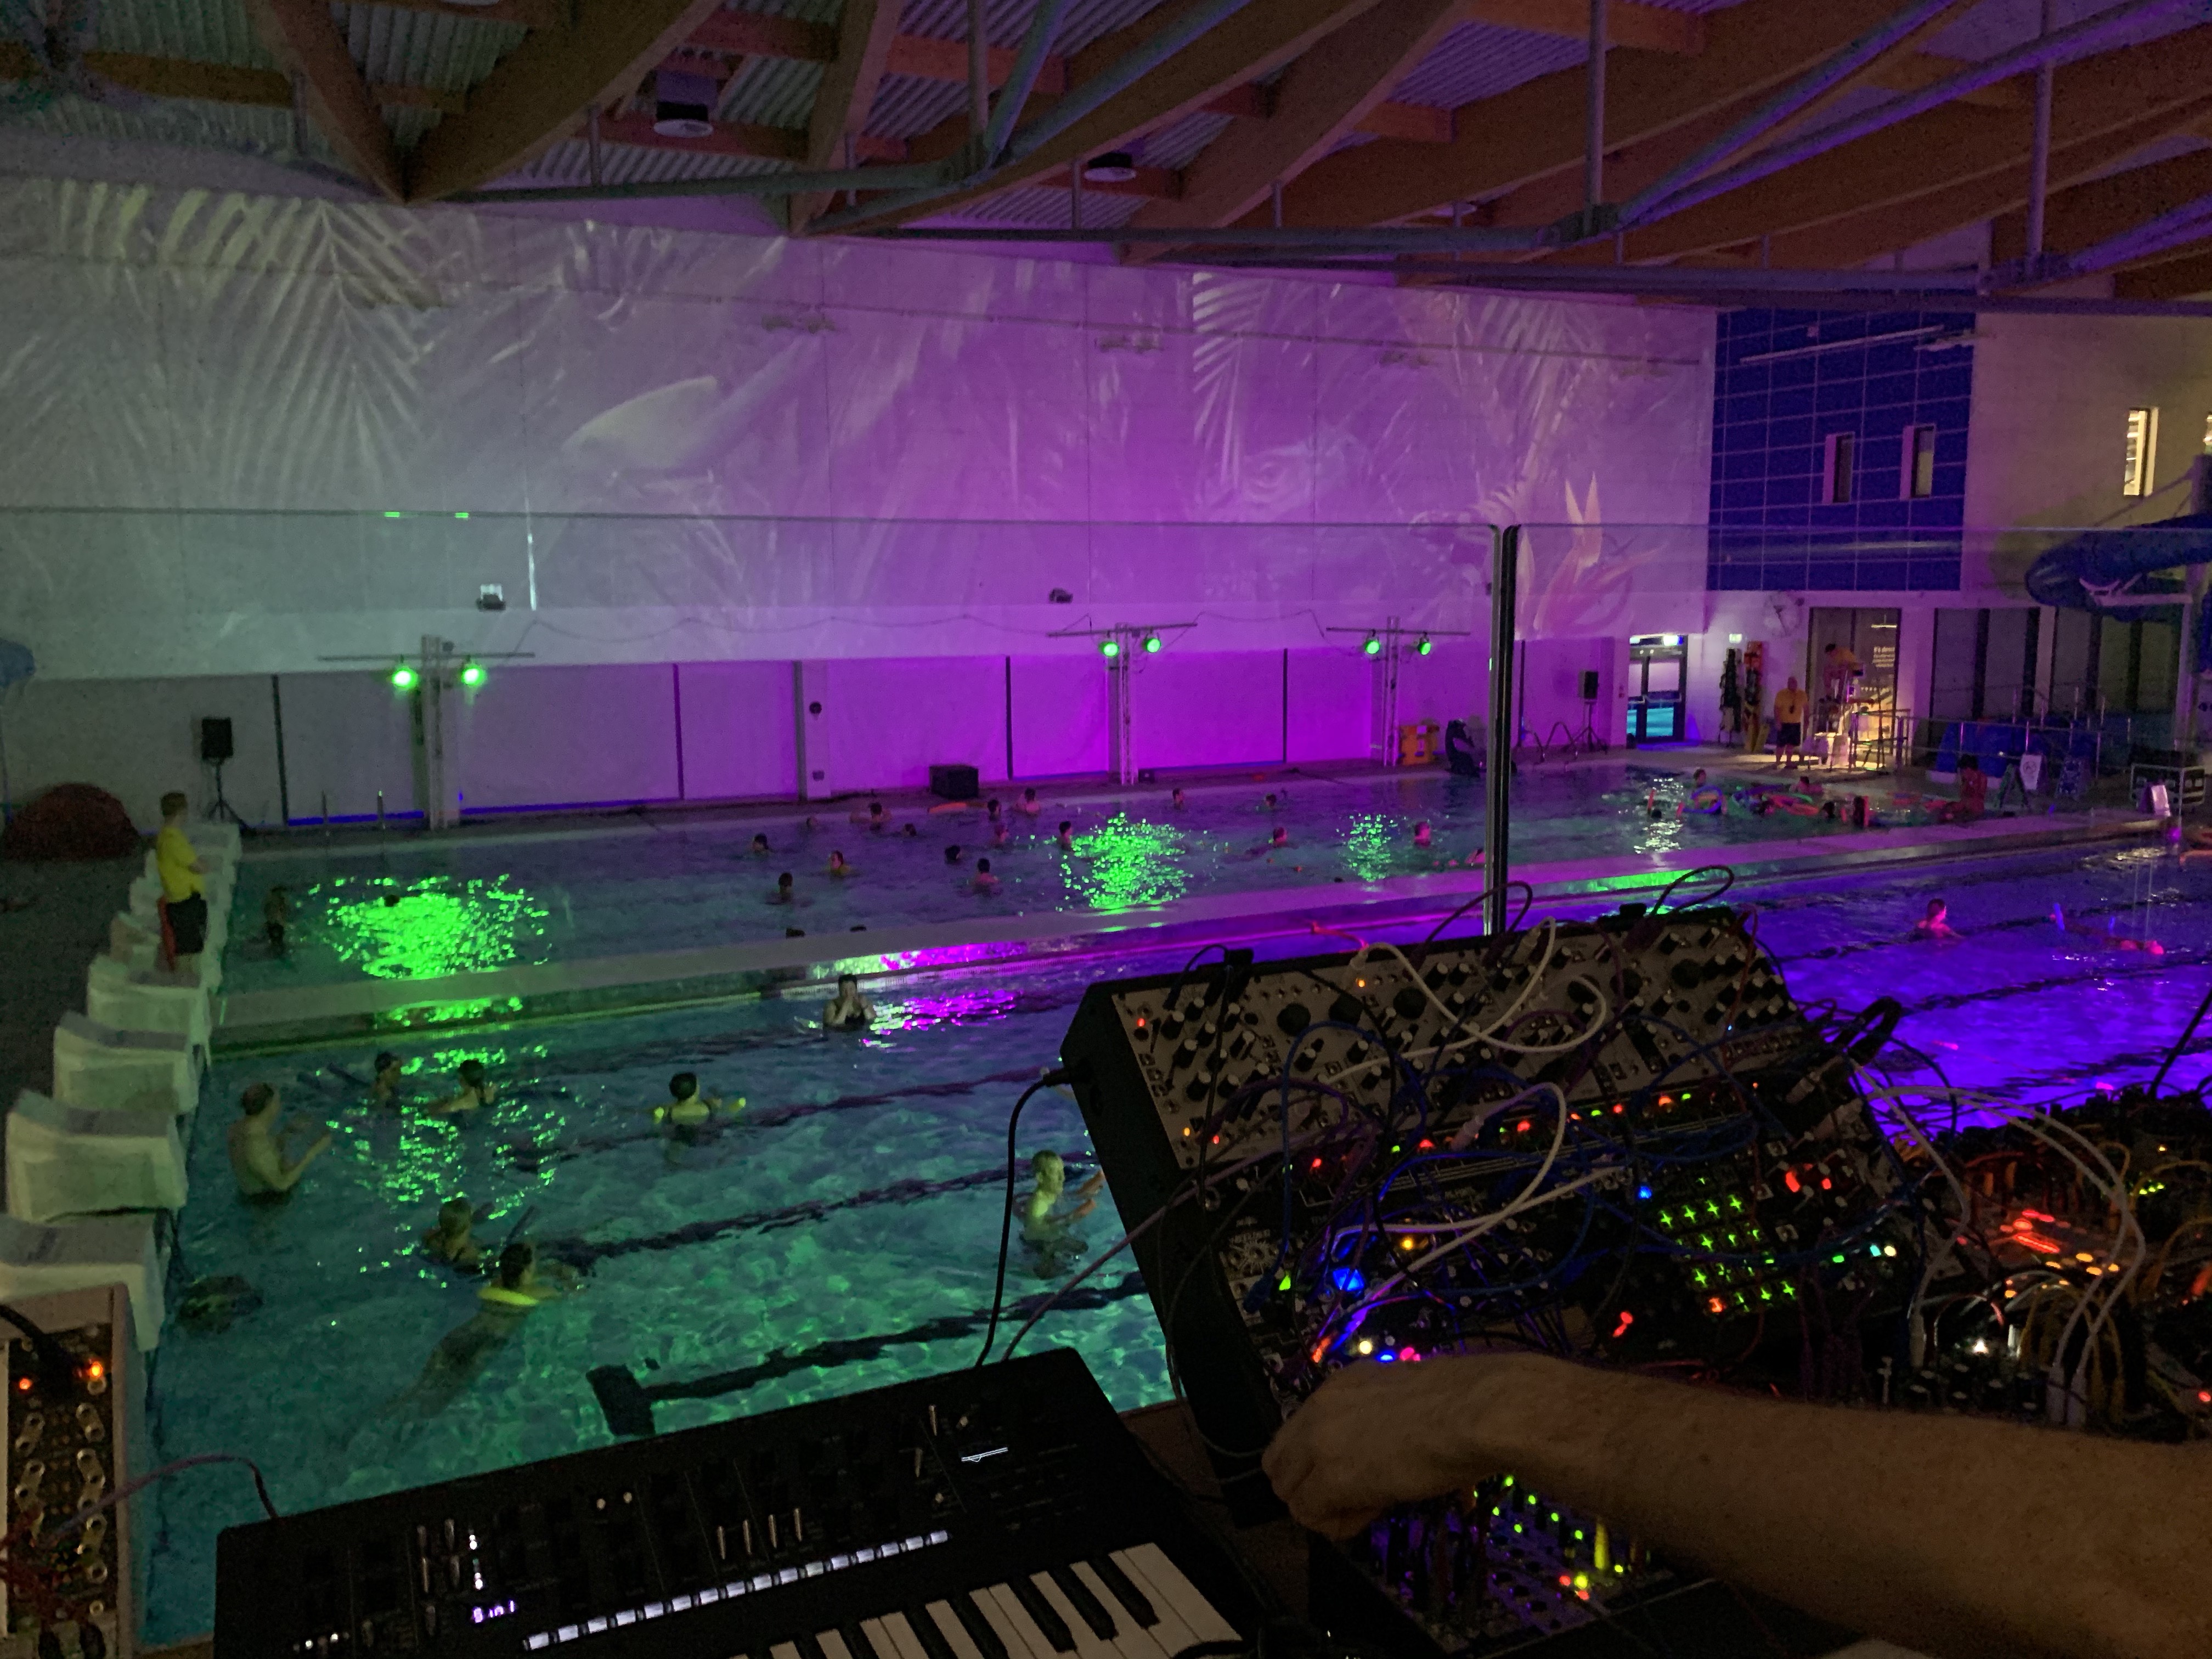 Two synthesisers being played pool side in a neon illuminated swimming pool.